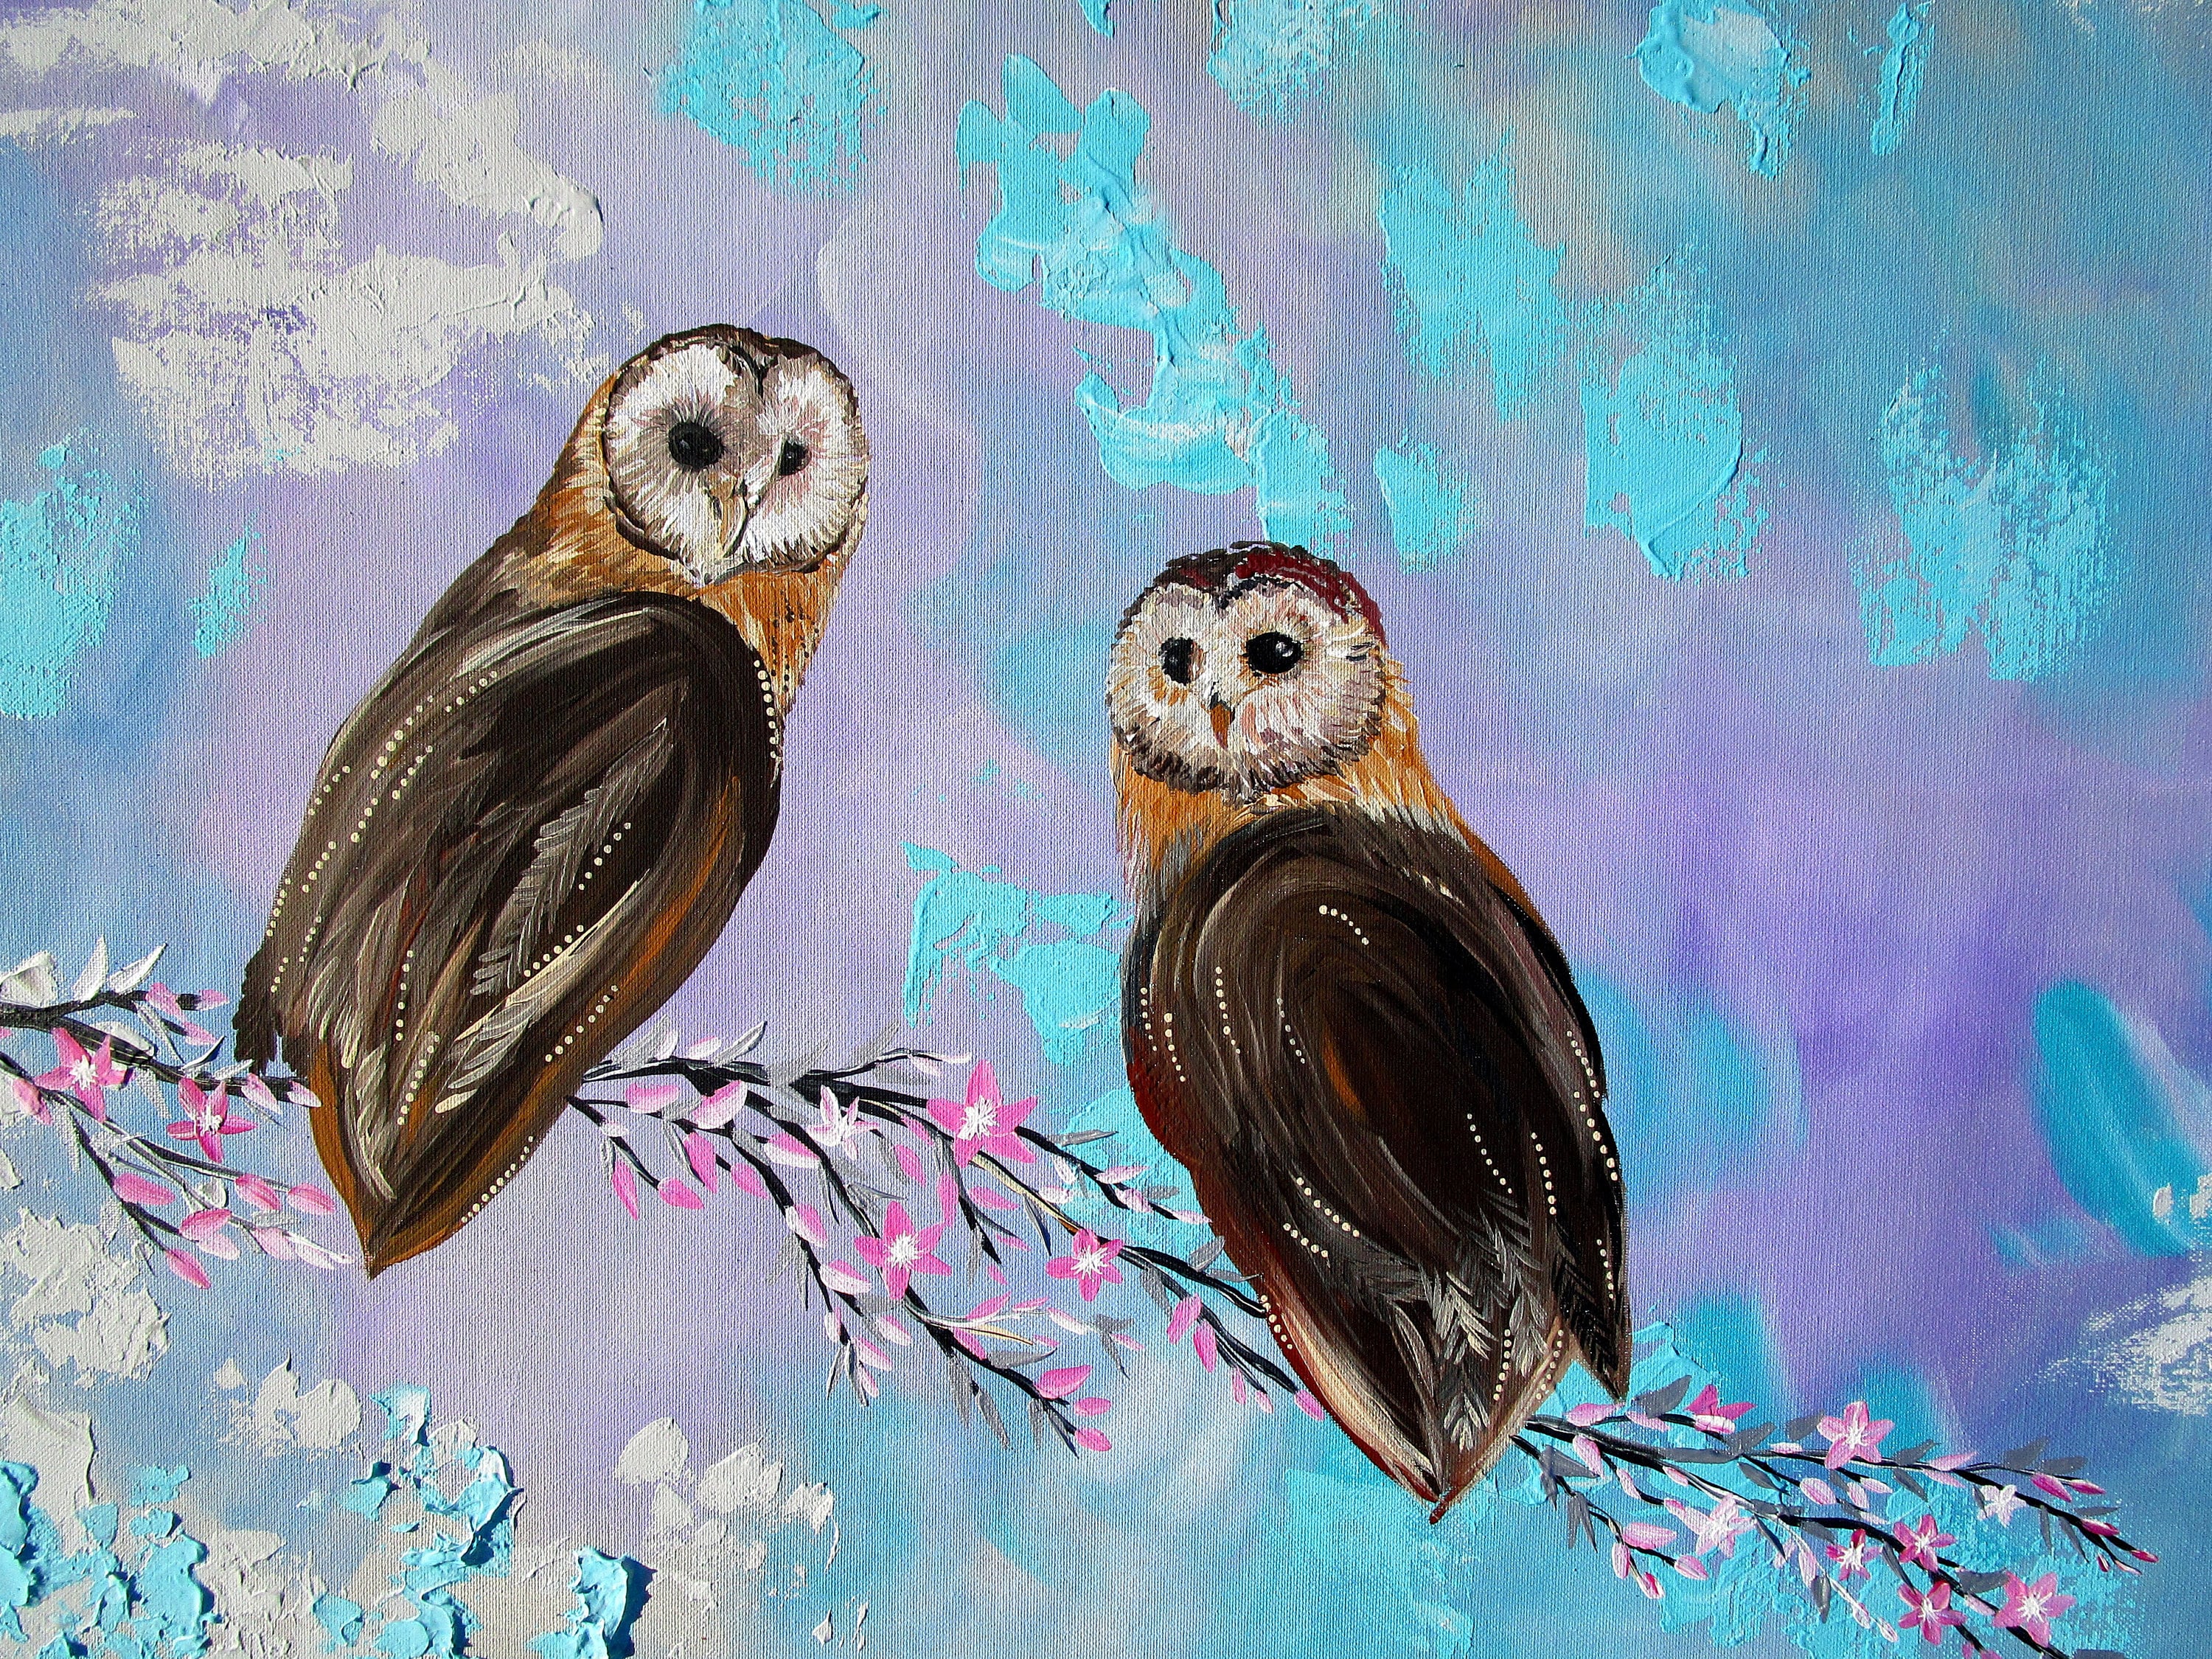 Owl Art Owl Painting Owl Pictures Owl Prints With 2 Owls Etsy 日本